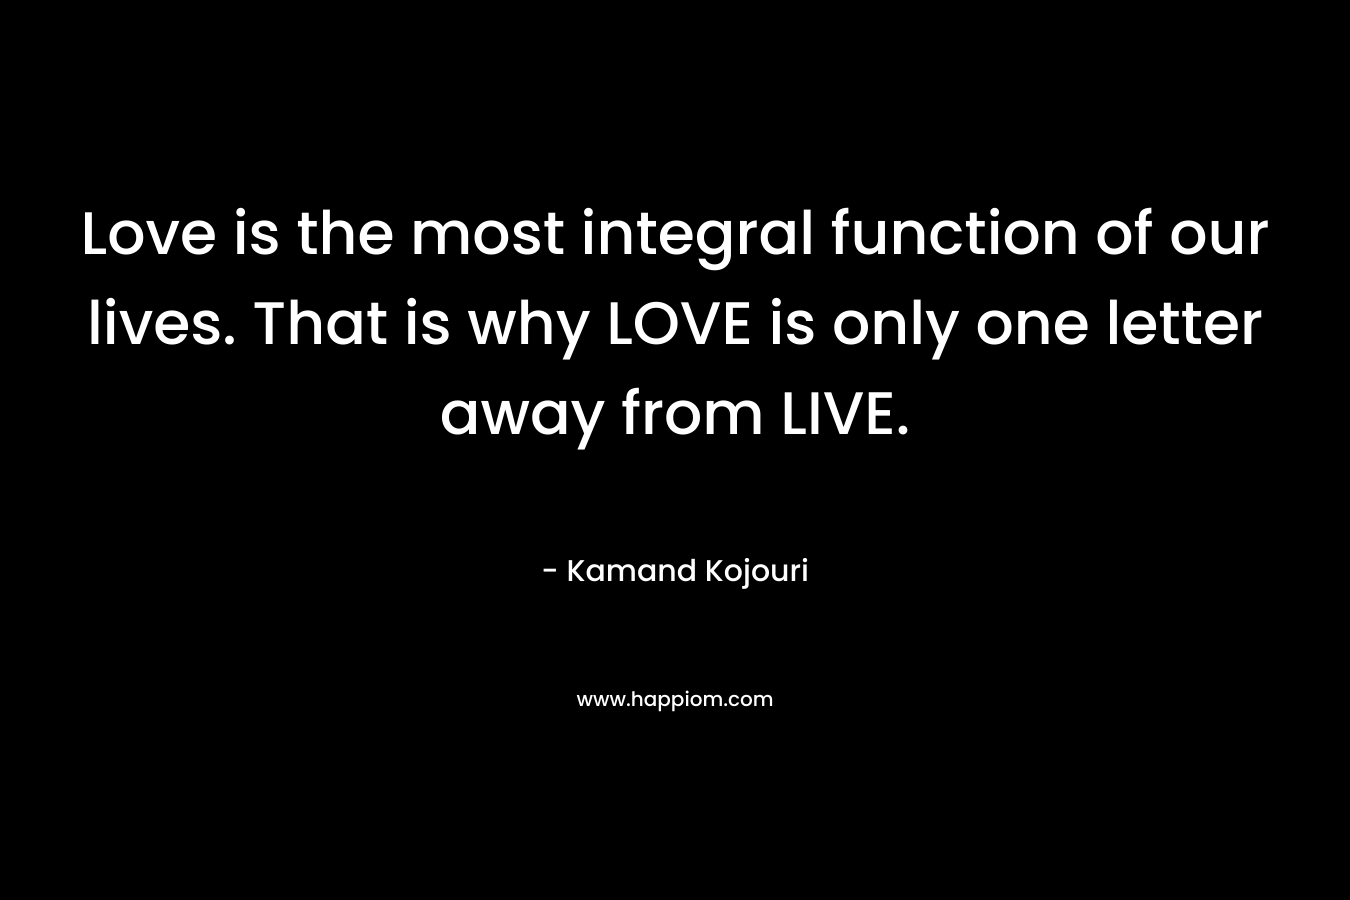 Love is the most integral function of our lives. That is why LOVE is only one letter away from LIVE. – Kamand Kojouri